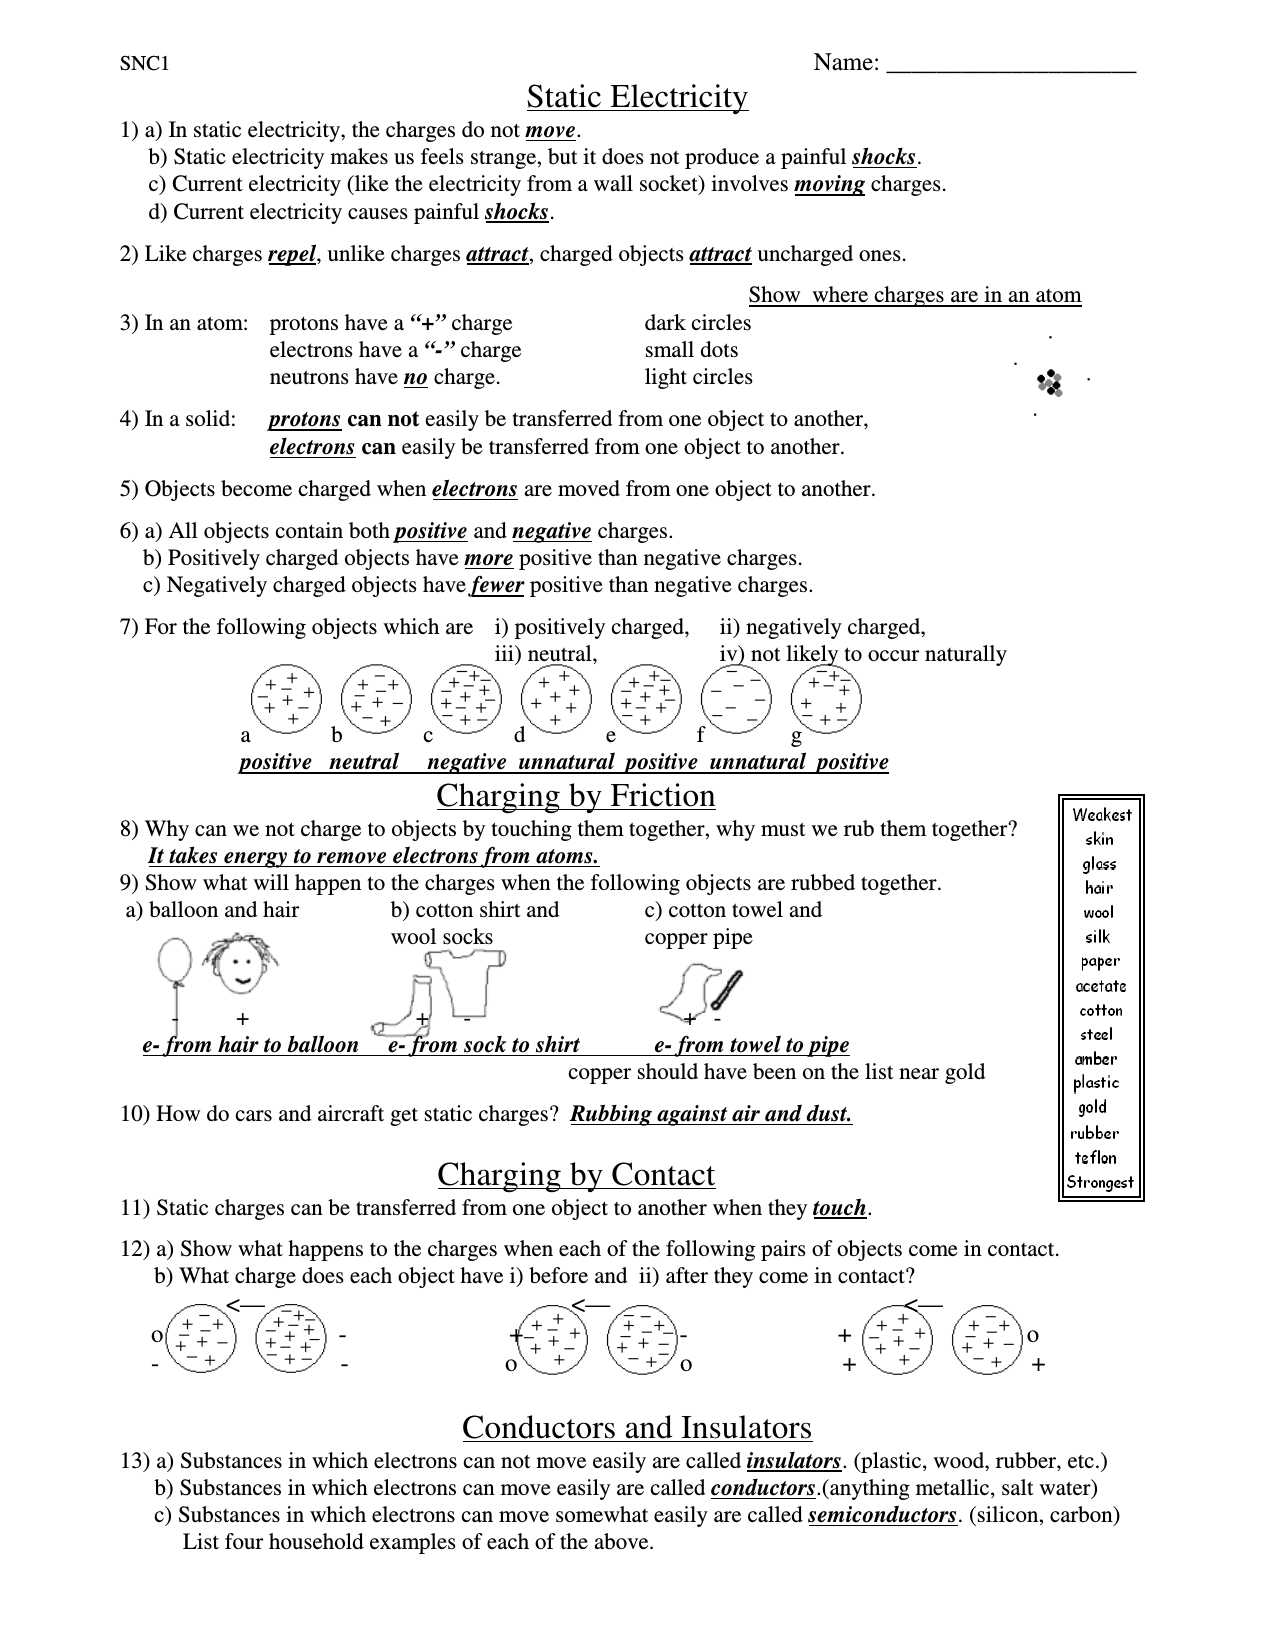 Electrical Power and Energy Worksheet together with Bill Nye the Science Guy Static Electricity Worksheet Answers